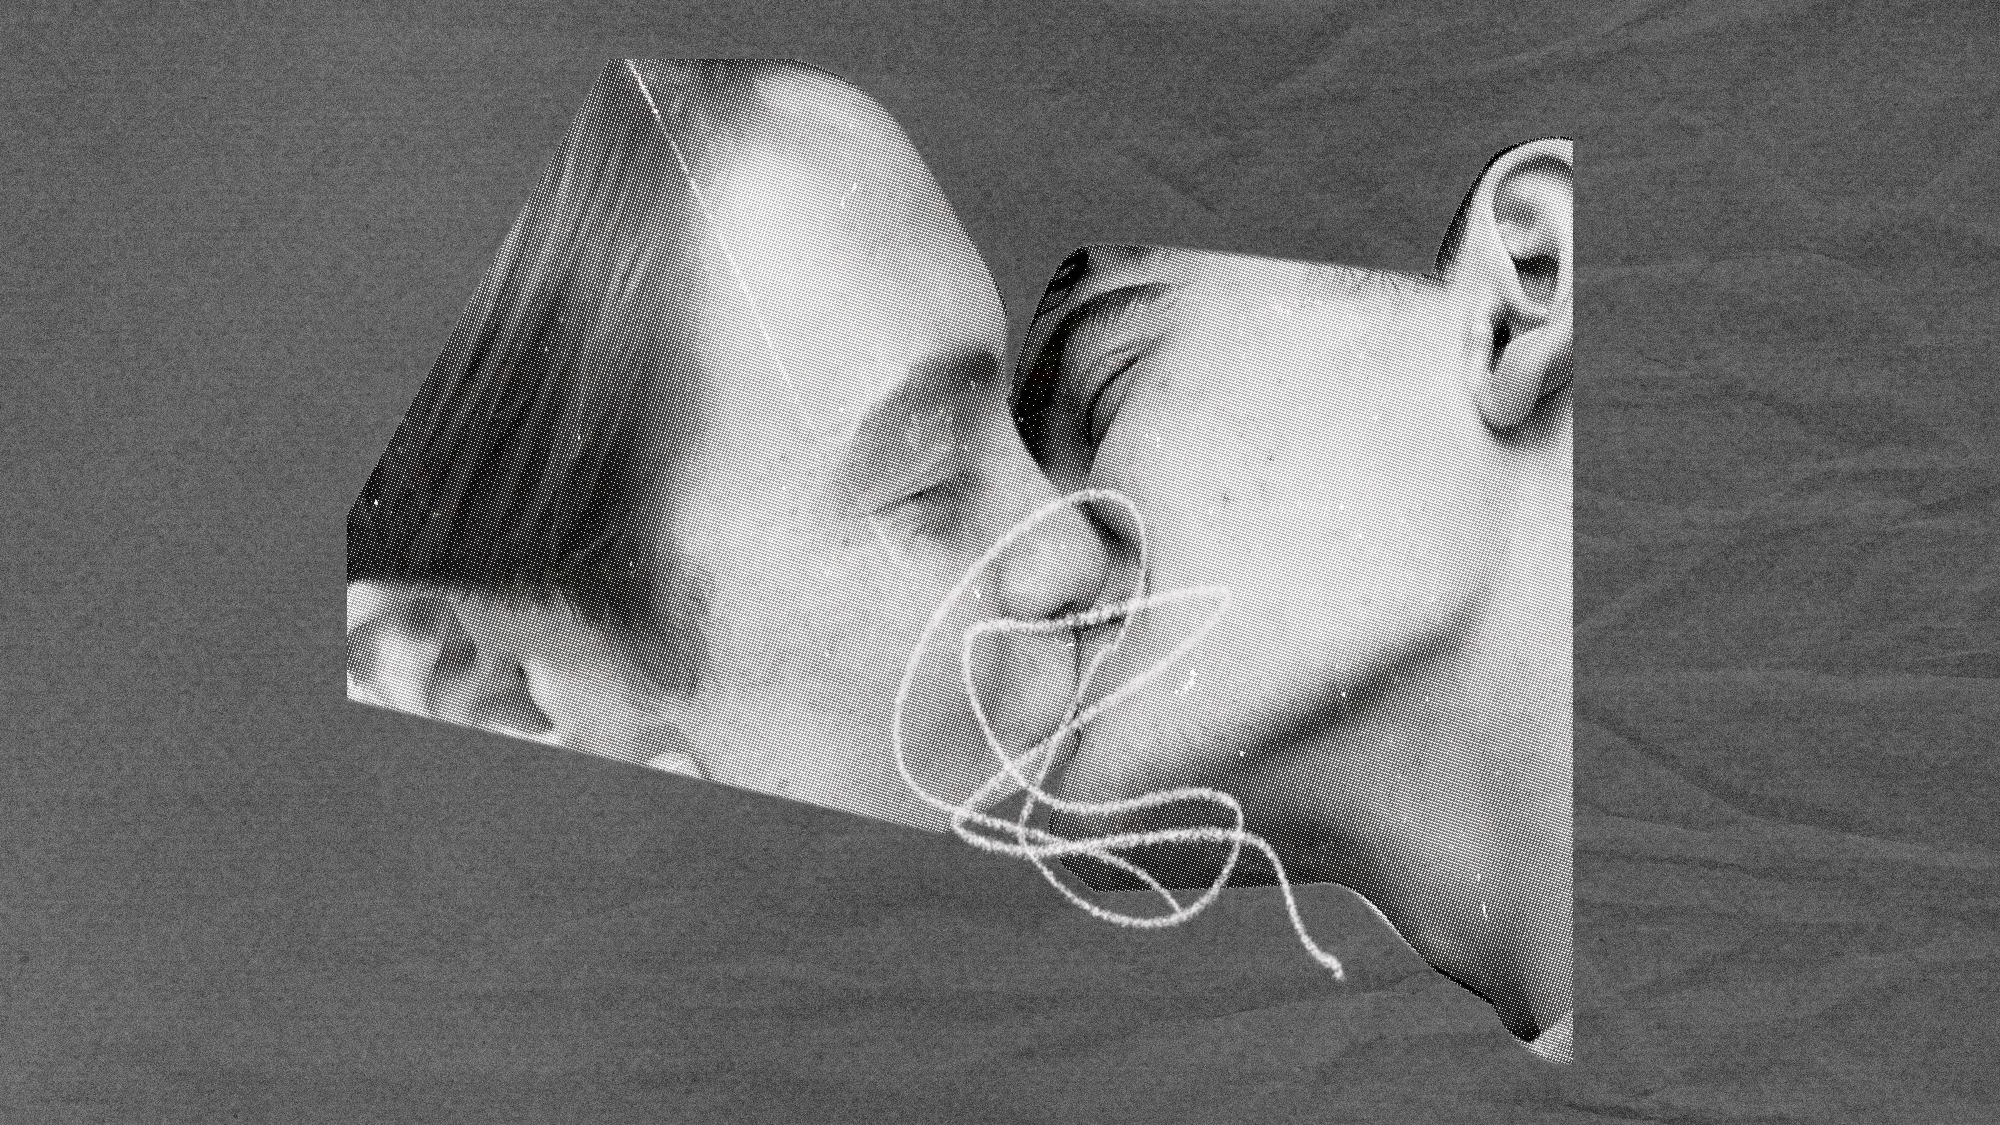 cut out photo of Two Teenage boys kissing with artistic white squiggle around lips